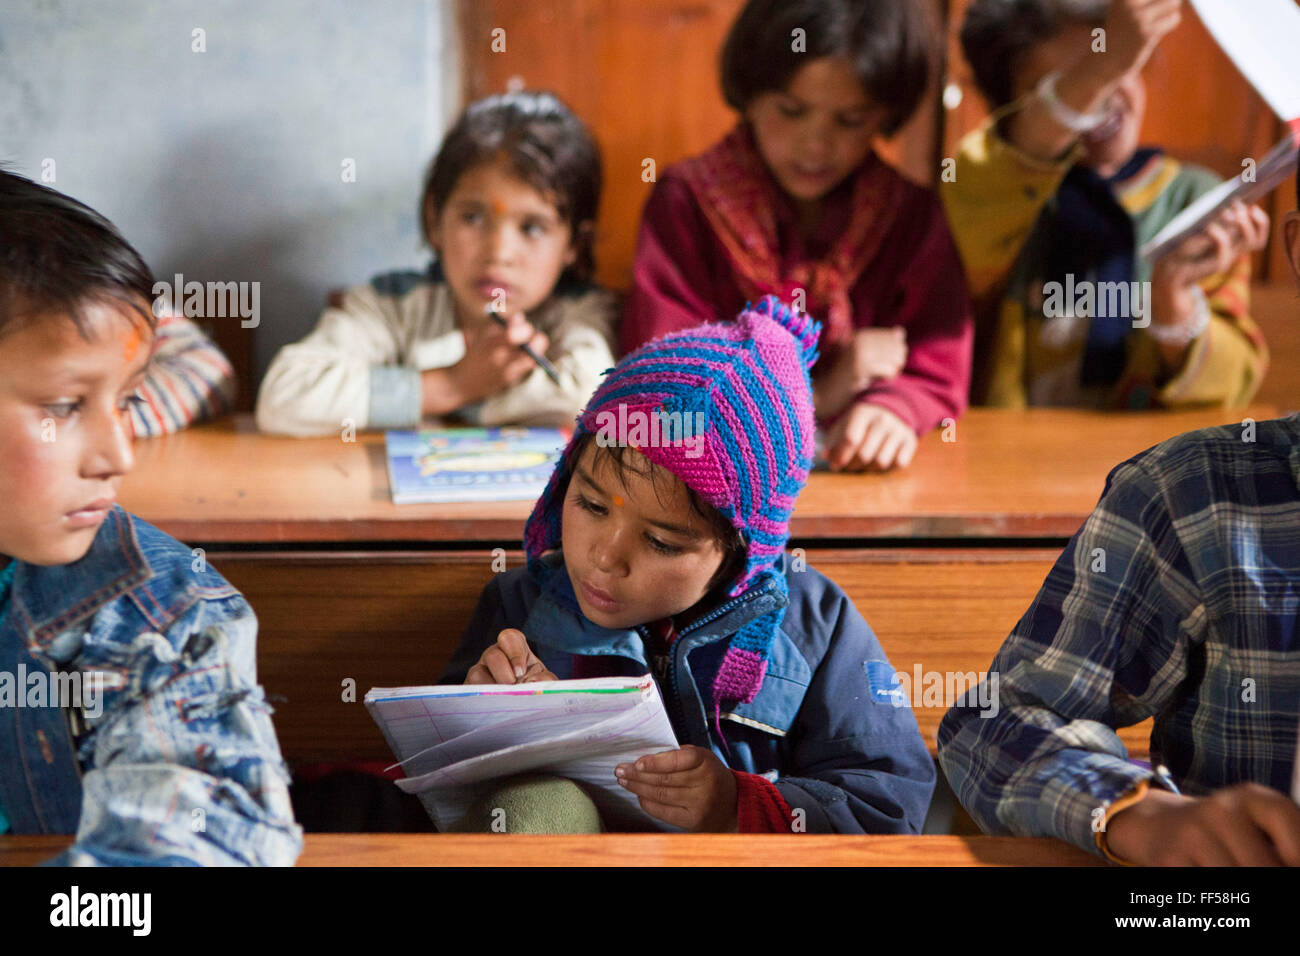 A young boy writing during a lesson at the Alternate Learning Hub, Subhai, Himalayas, India. The school is organized and funded by the Pragya charity.  Pragya is a non-profit organization providing education and information services in high altitude areas in the Himalayas. Stock Photo